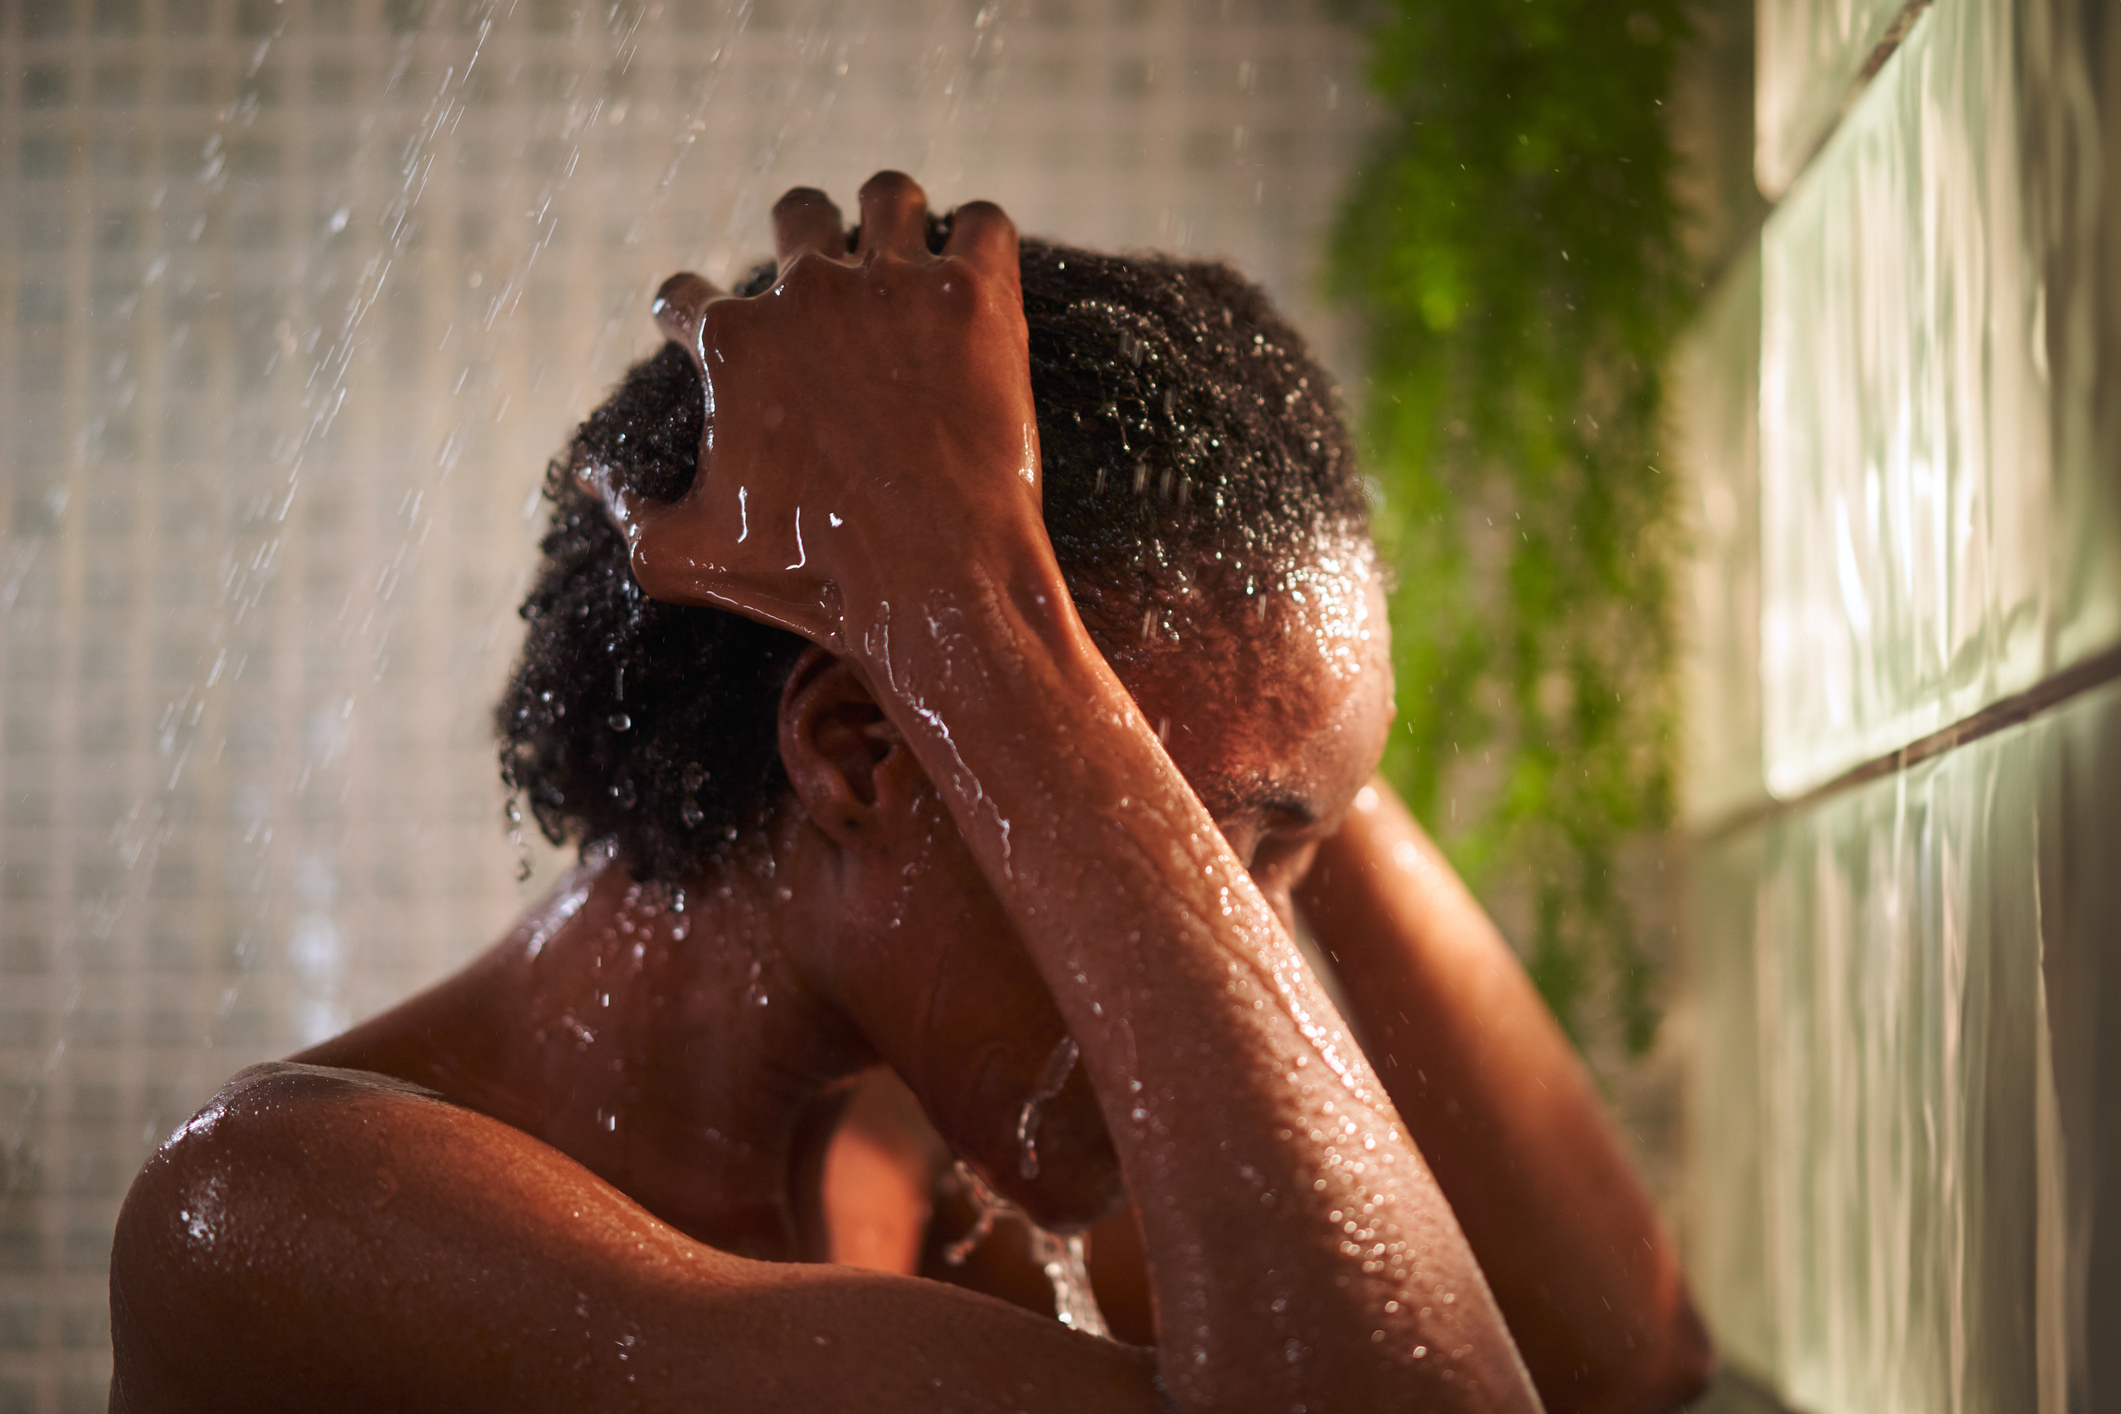 A person is showering, with hands massaging their wet hair. They appear relaxed, and there is a green plant in the background